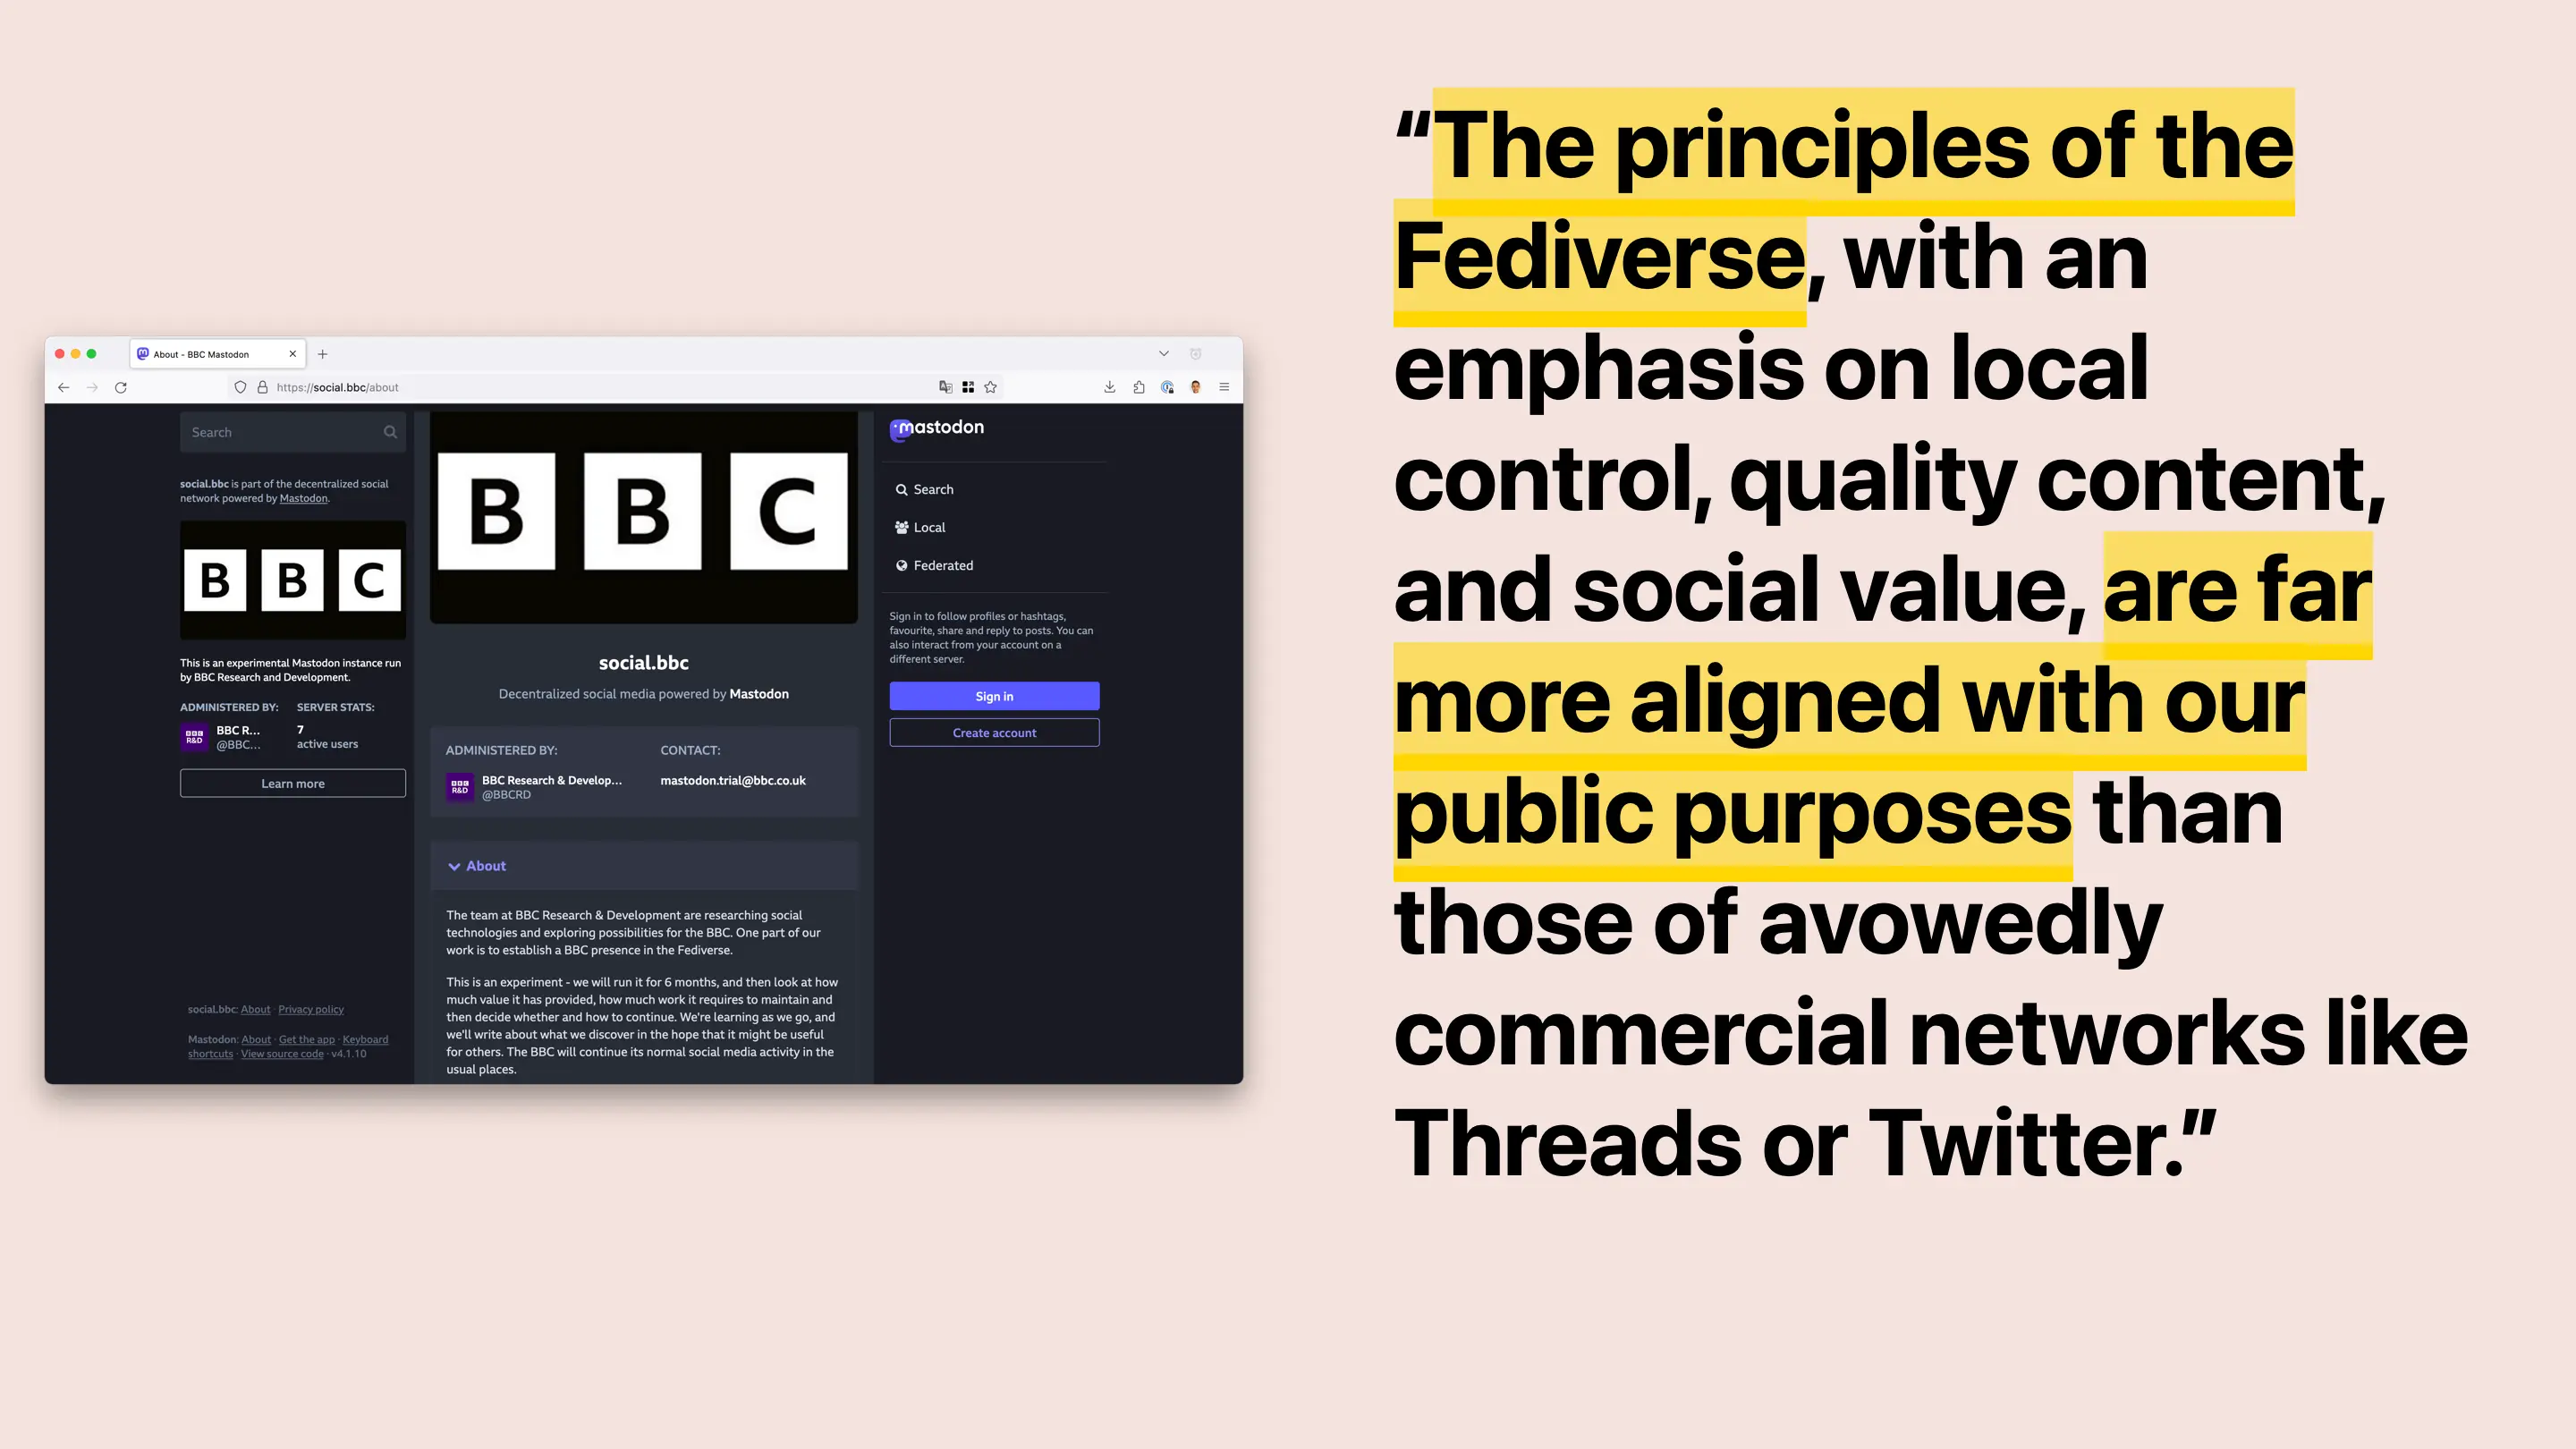 Screenshot of . Text: The principles of the Fediverse, with an emphasis on local control, quality content, and social value, are far more aligned with our public purposes than those of avowedly commercial networks like Threads or Twitter.